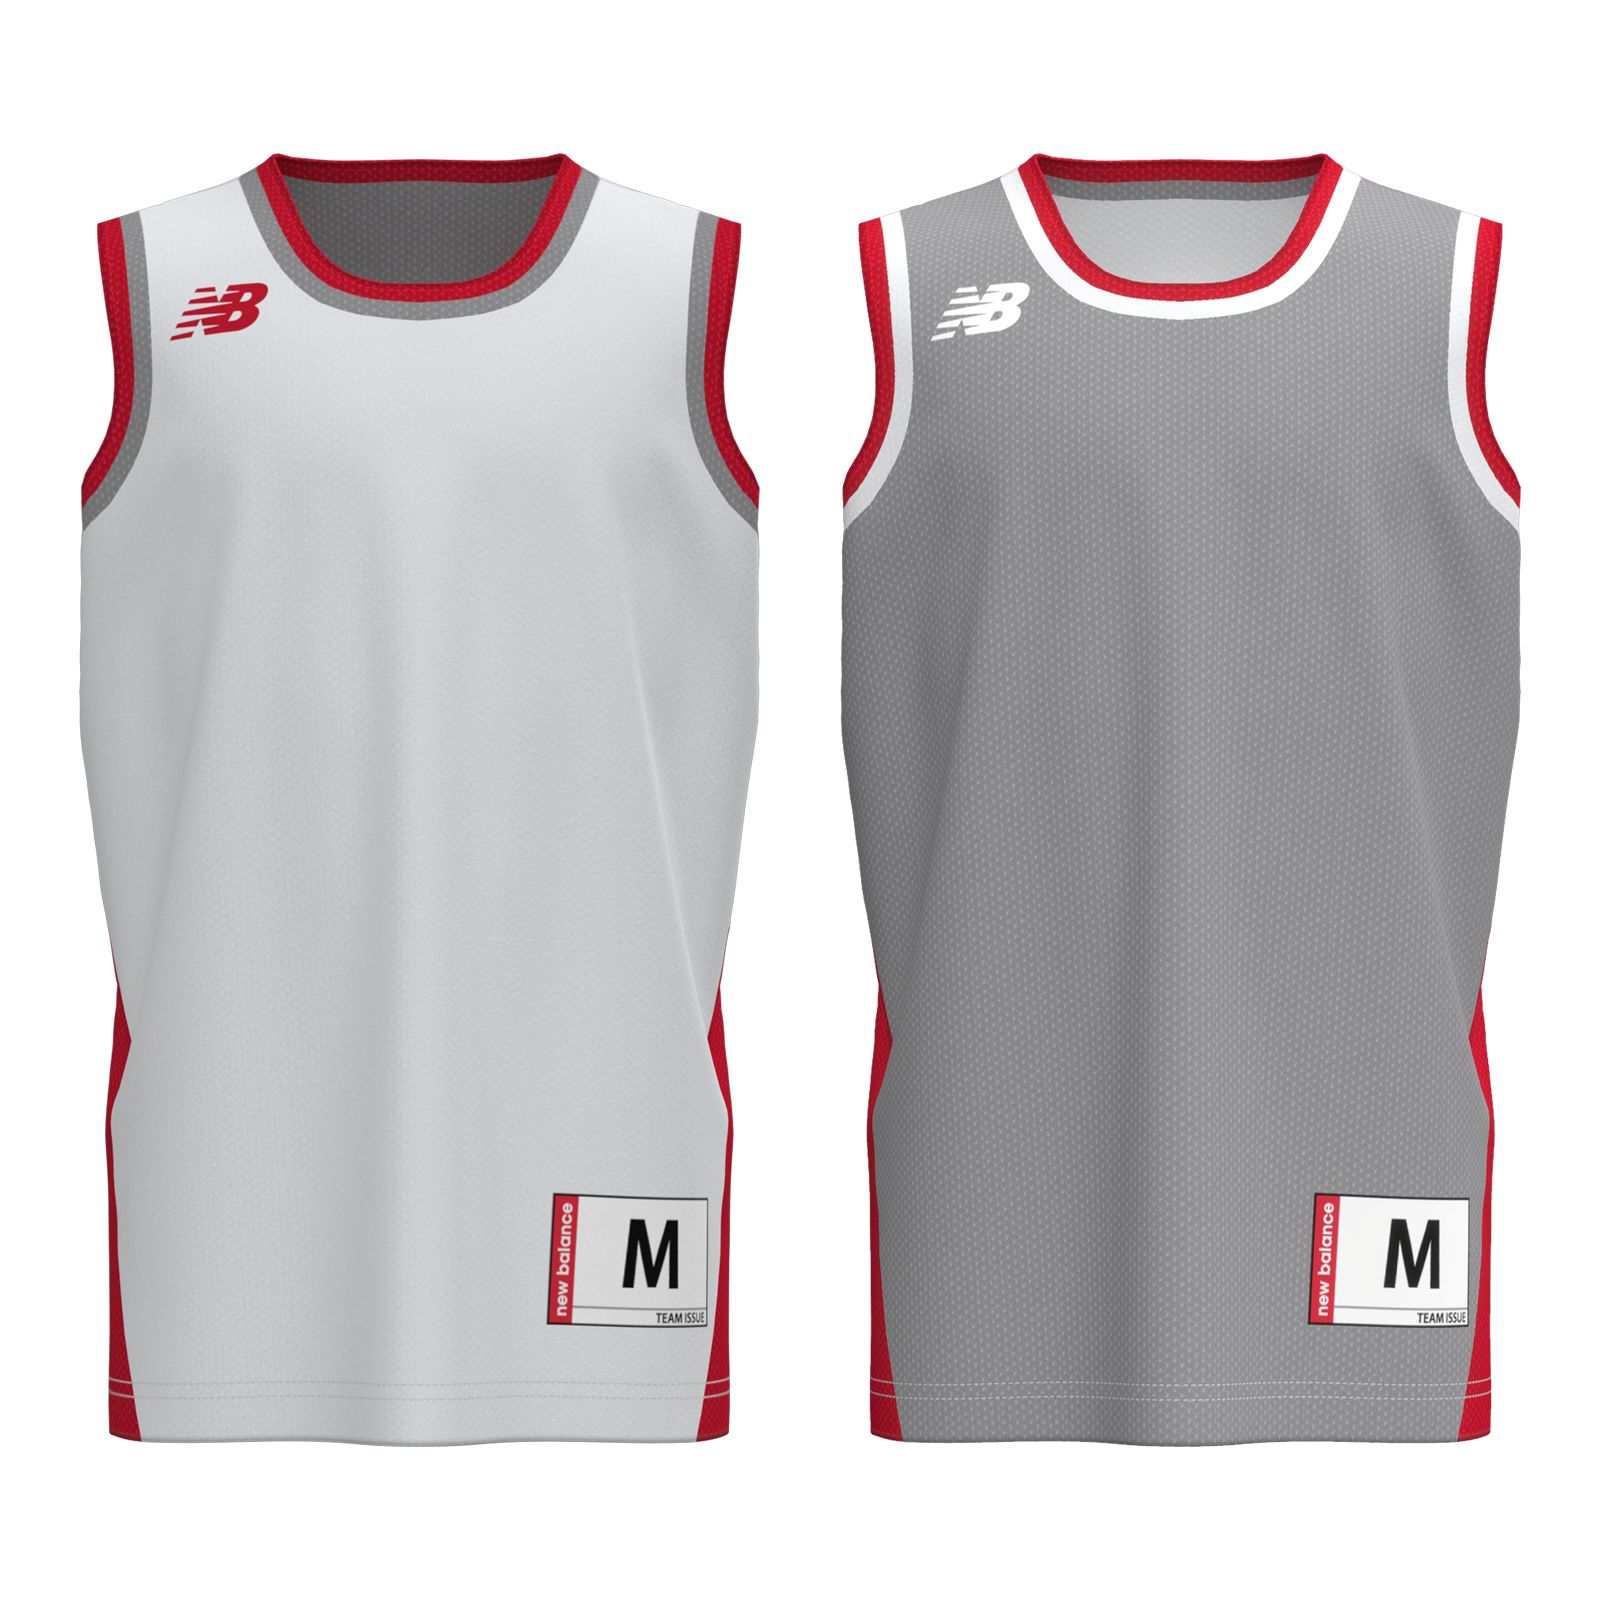 Youth Baseline Reversible Jersey - Youth - Basketball, - NB Team Sports - US